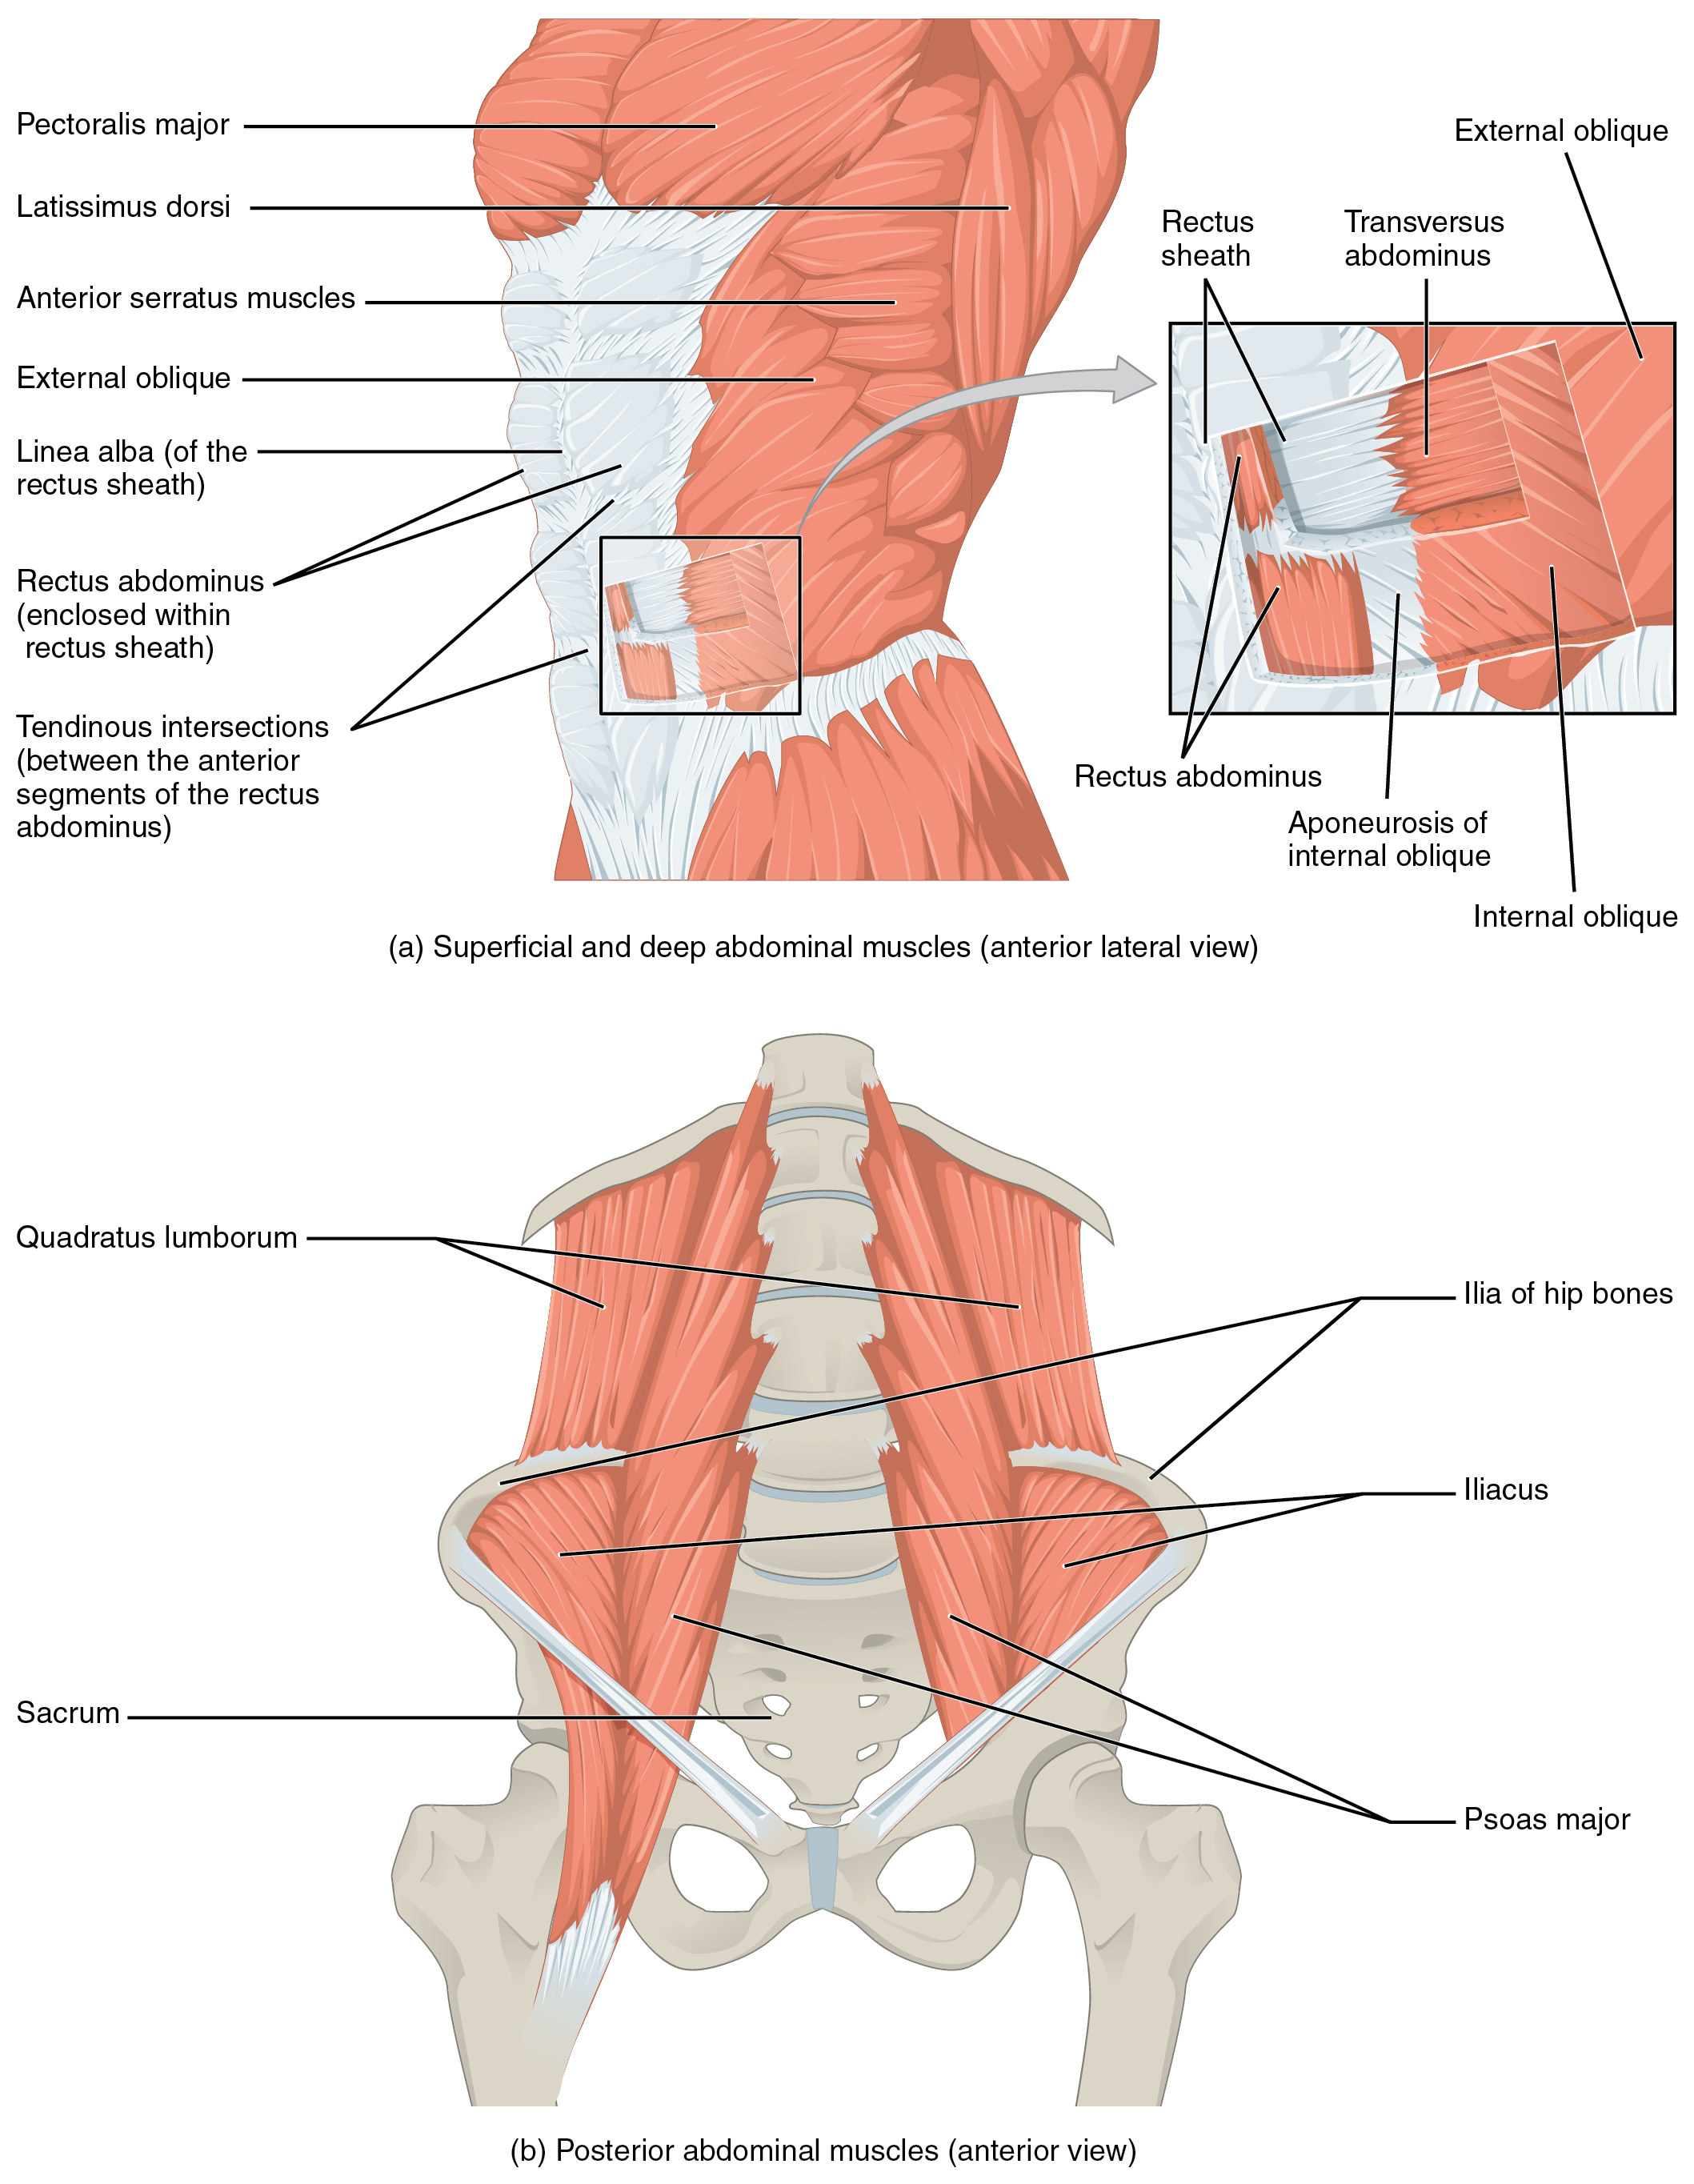 The top panel shows the lateral view of the superficial and deep abdominal muscles. The bottom panel shows the anterior view of the posterior abdominal muscles.